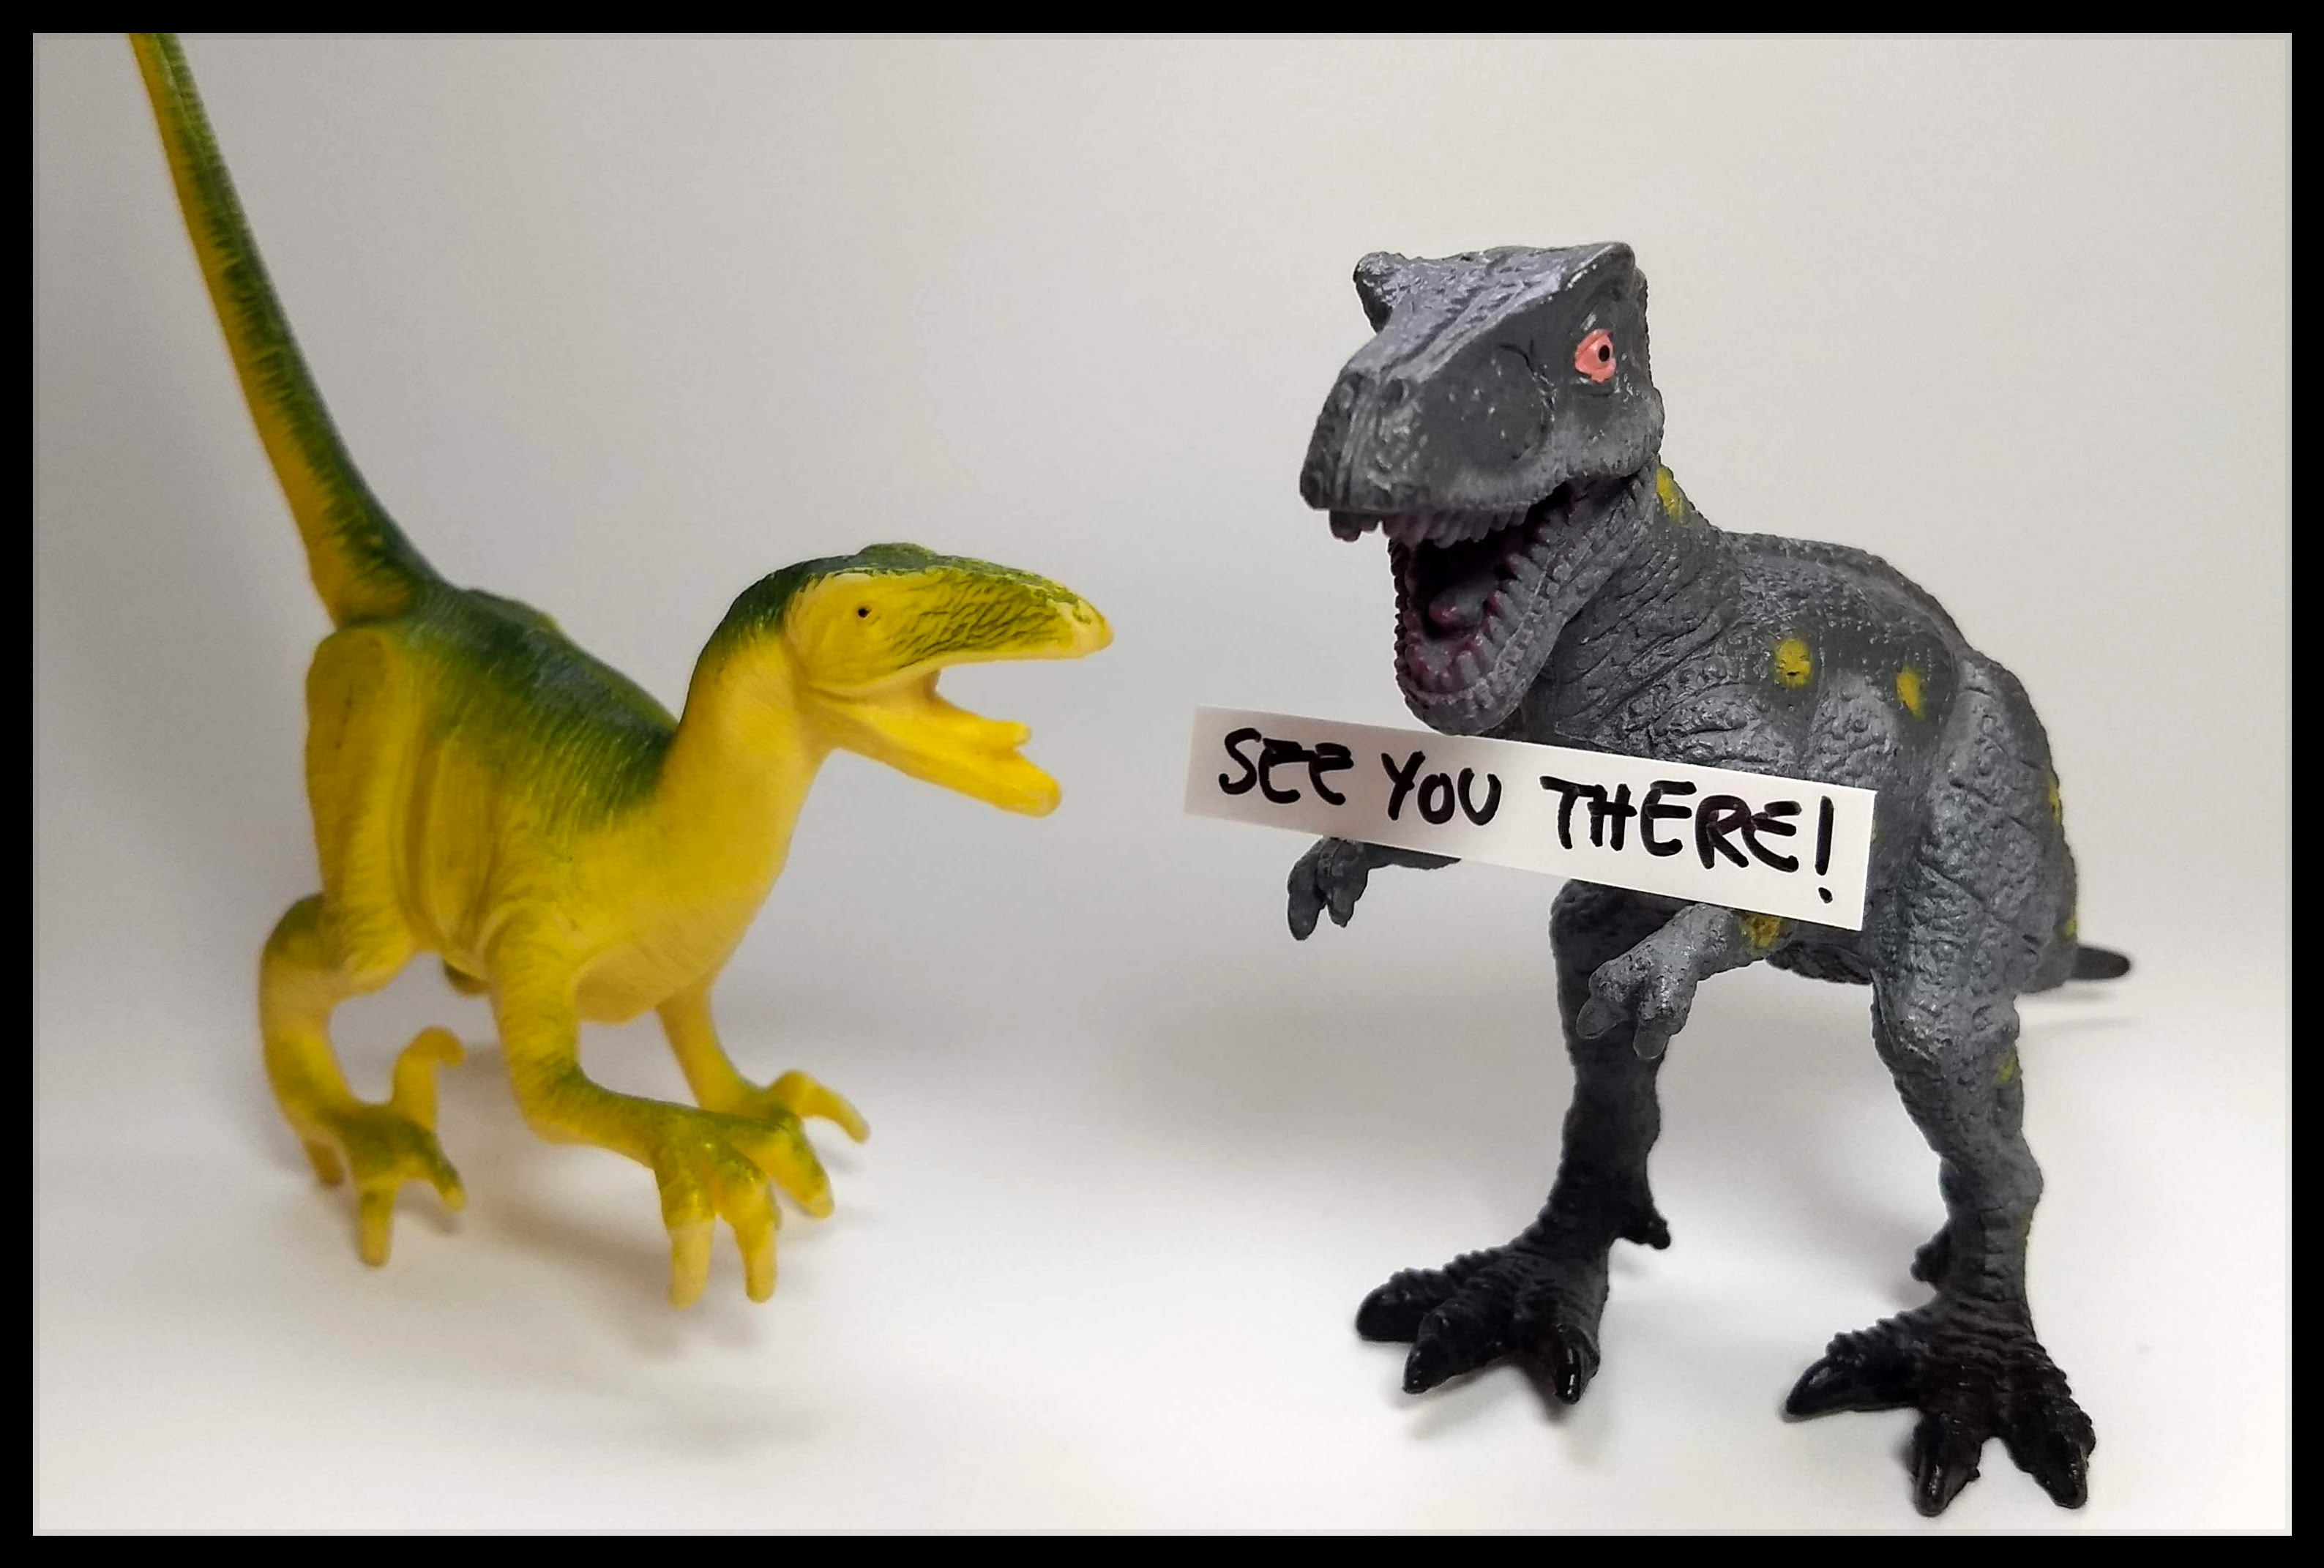 Two toy dinosaurs. One is holding a sign that says SEE YOU THERE!